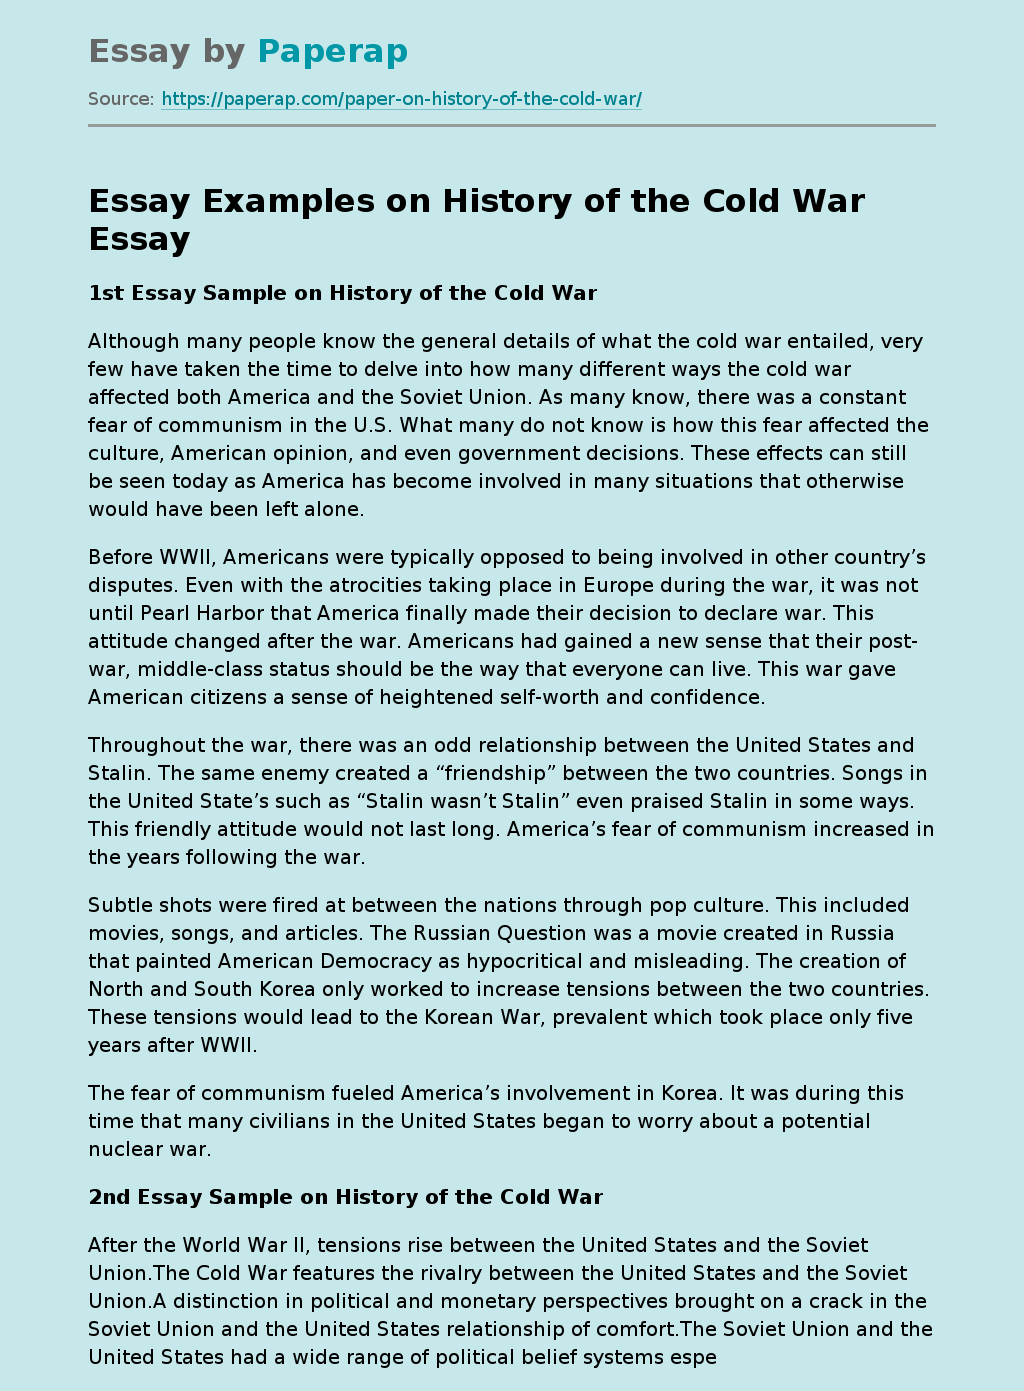 Cold War: Global Geopolitical, Military, Economic and Ideological Confrontation